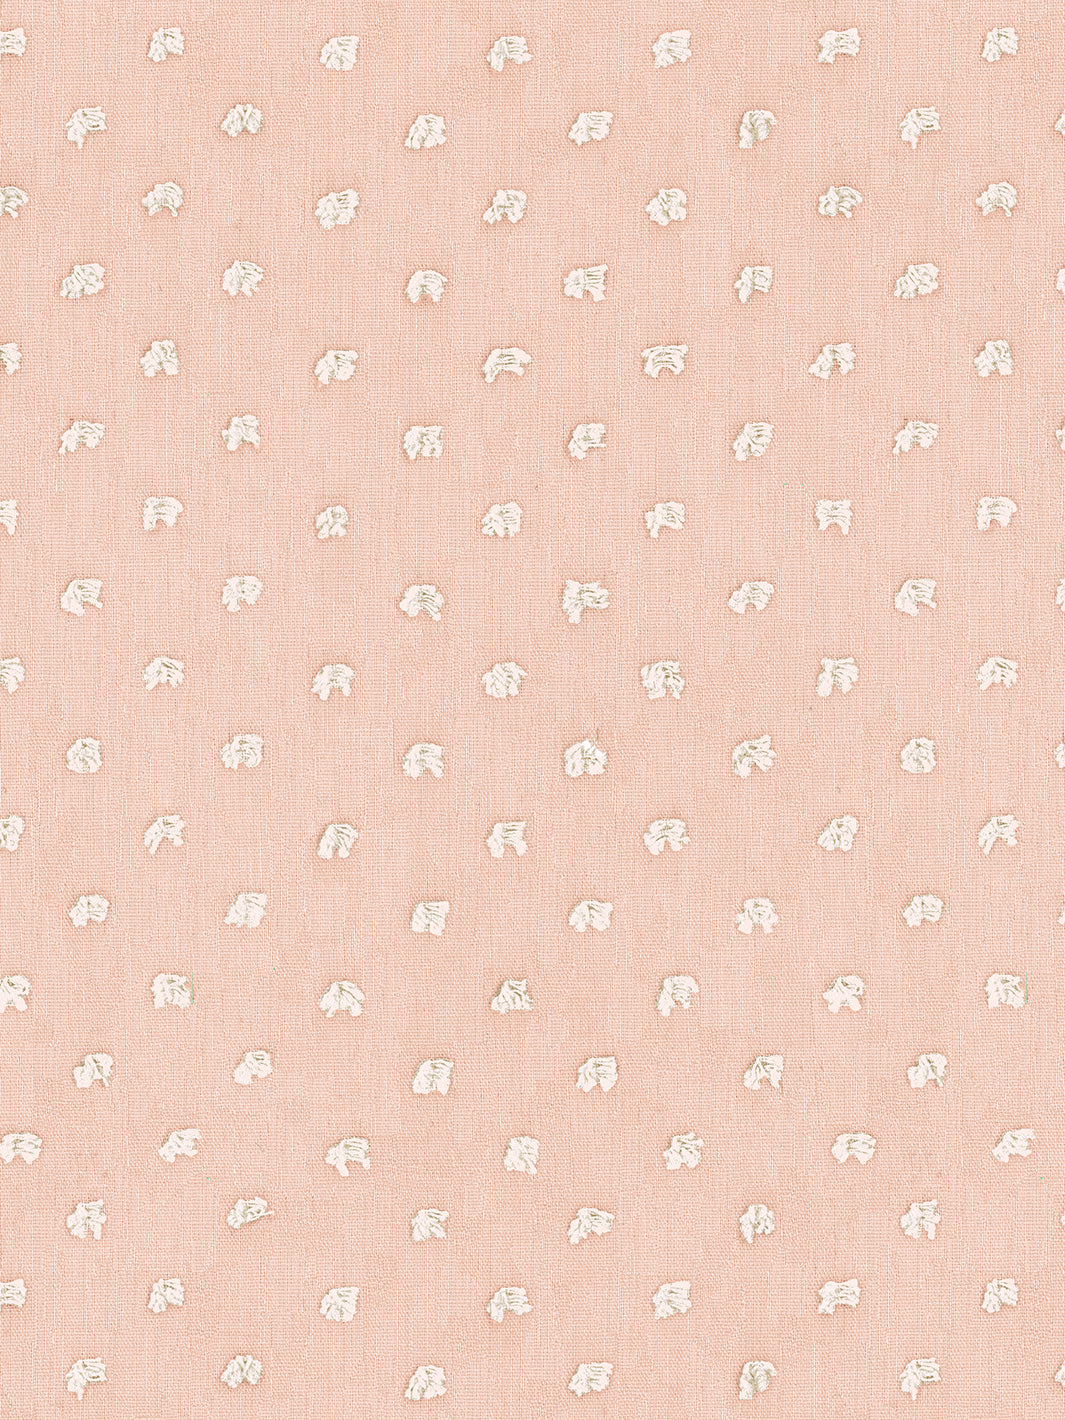 'Dotted Swiss' Wallpaper by Sarah Jessica Parker - Buff